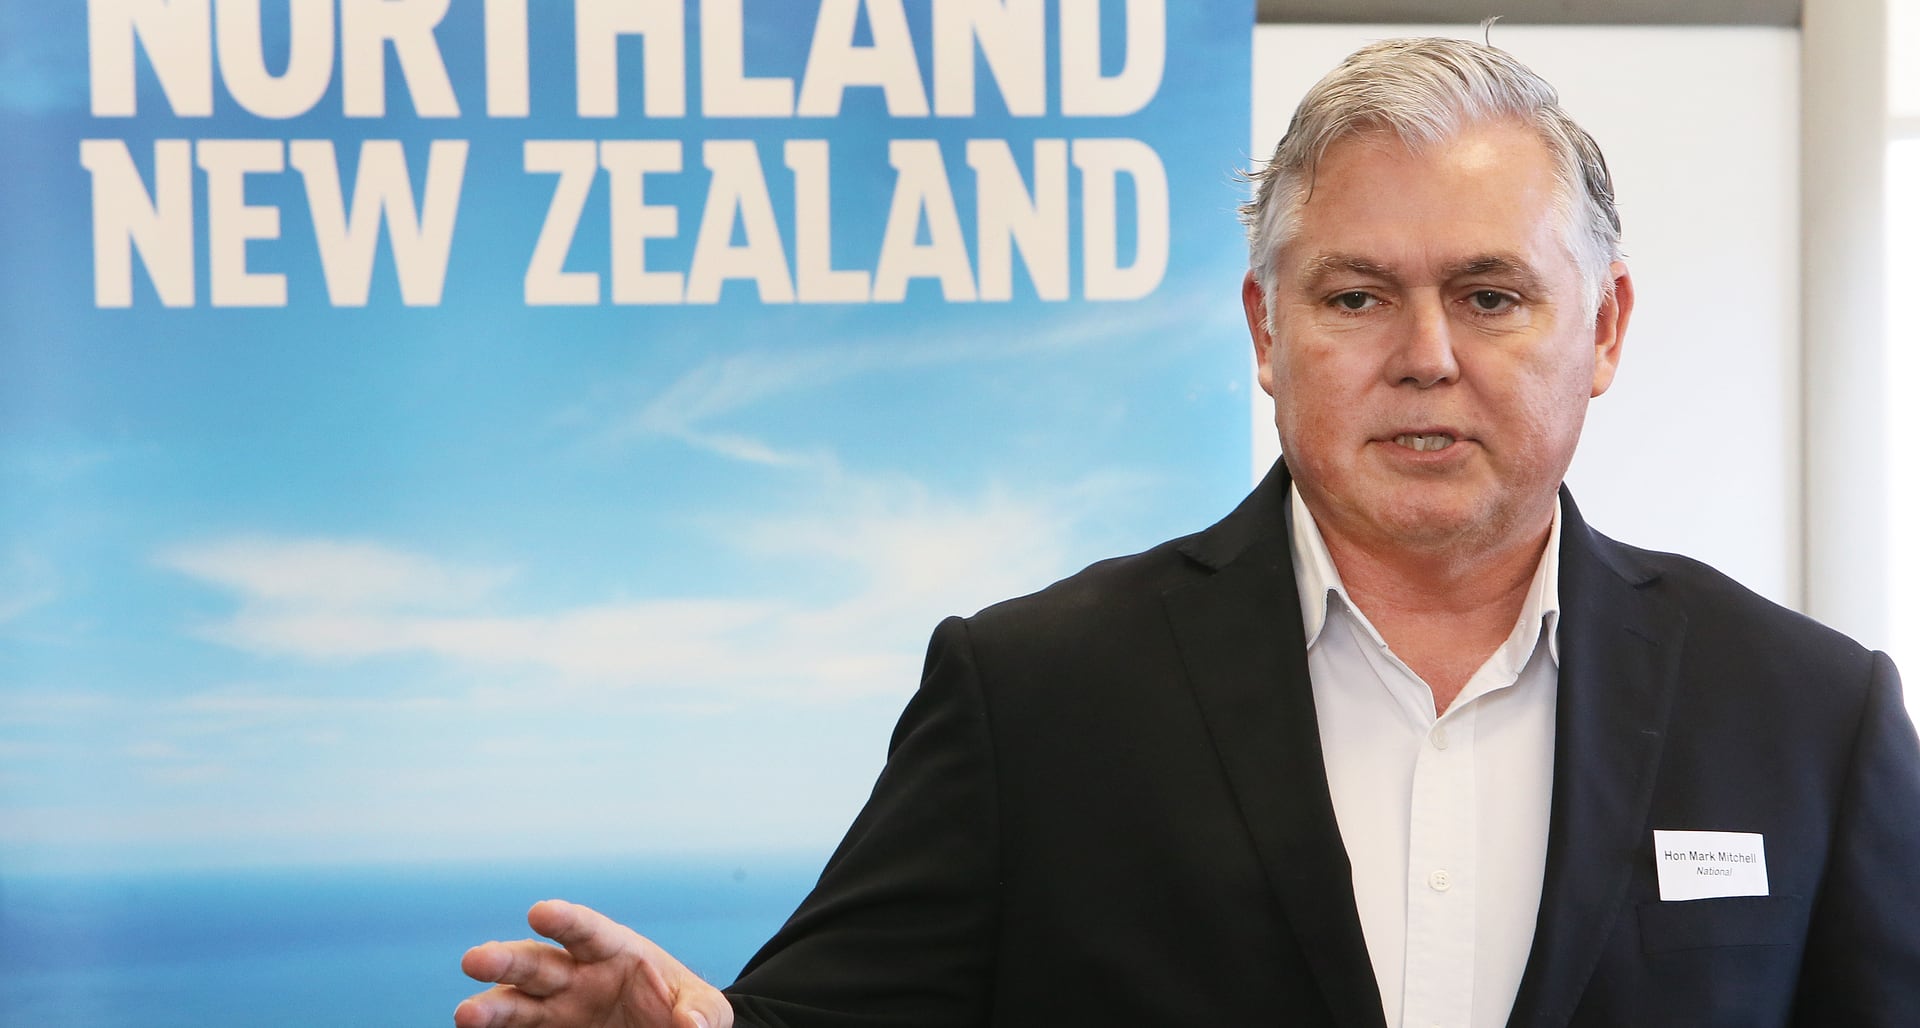 National Corrections spokesperson Mark Mitchell says Labour has focused on 'emptying out New Zealand’s prisons', rather than trying to reduce crime.